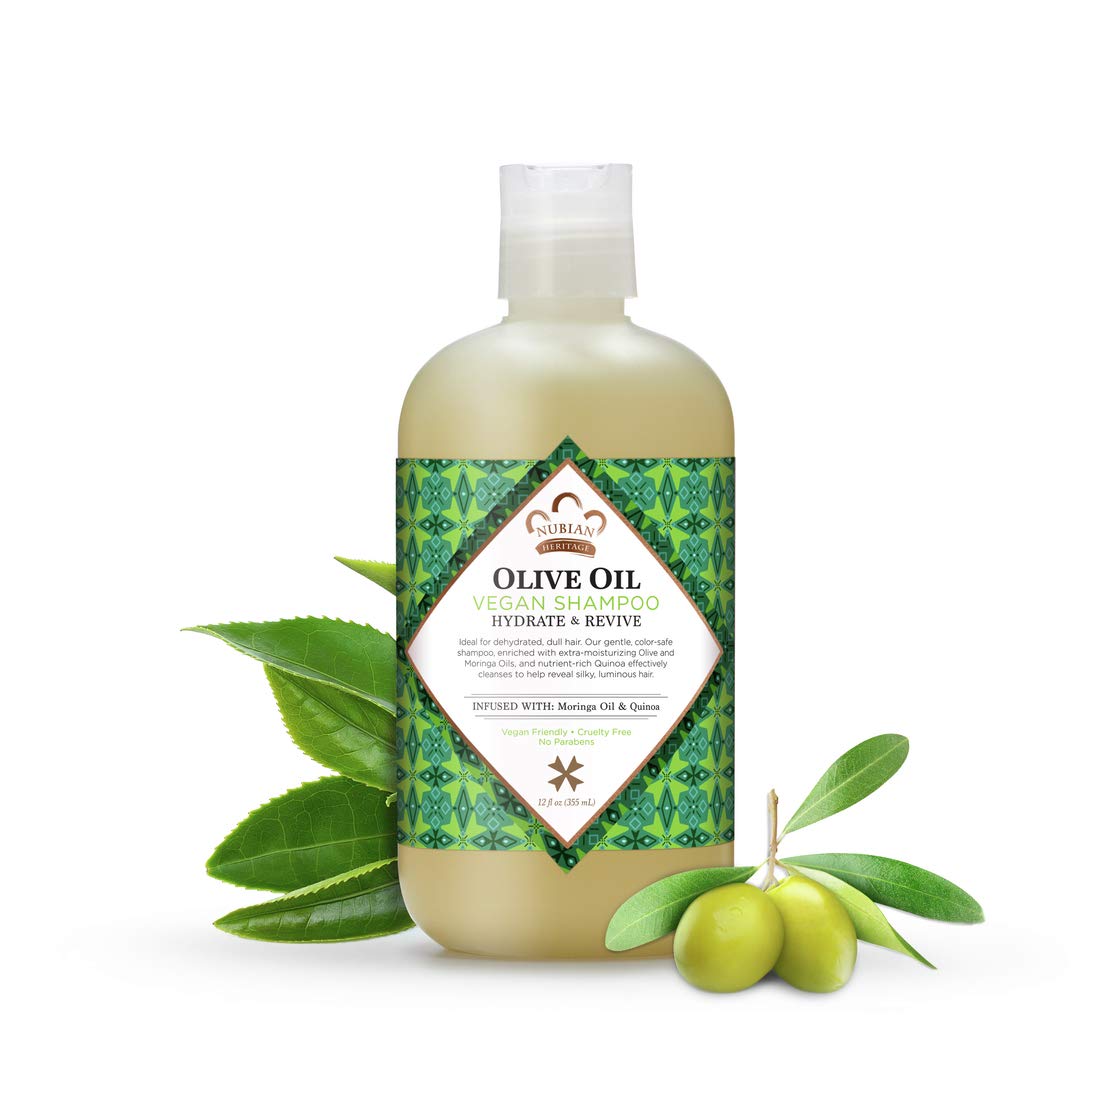 12-oz Nubian Heritage Shampoo for Dry Hair Olive Oil Hydrate and Revive $3.98 w/ S&S + Free Shipping w/ Prime or on $35+